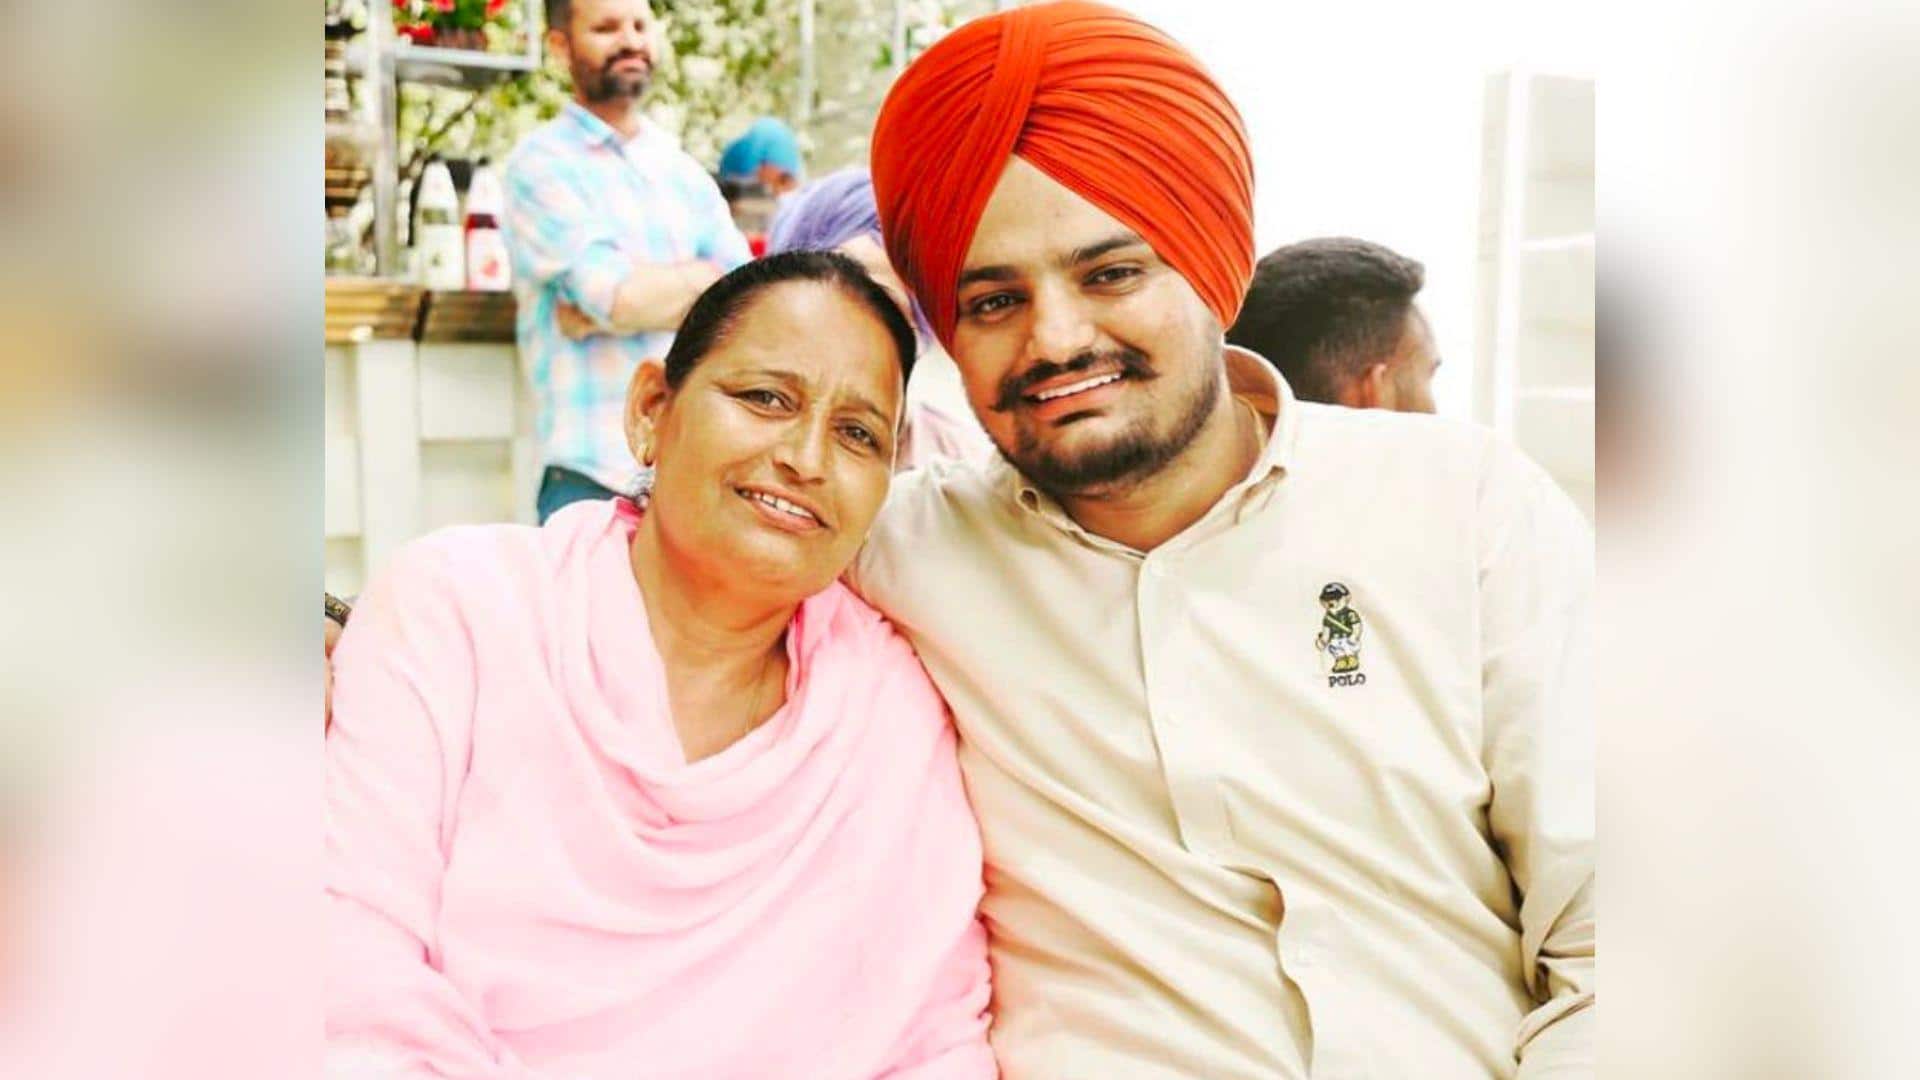 Sidhu Moose Wala's parents expecting baby soon: Reports